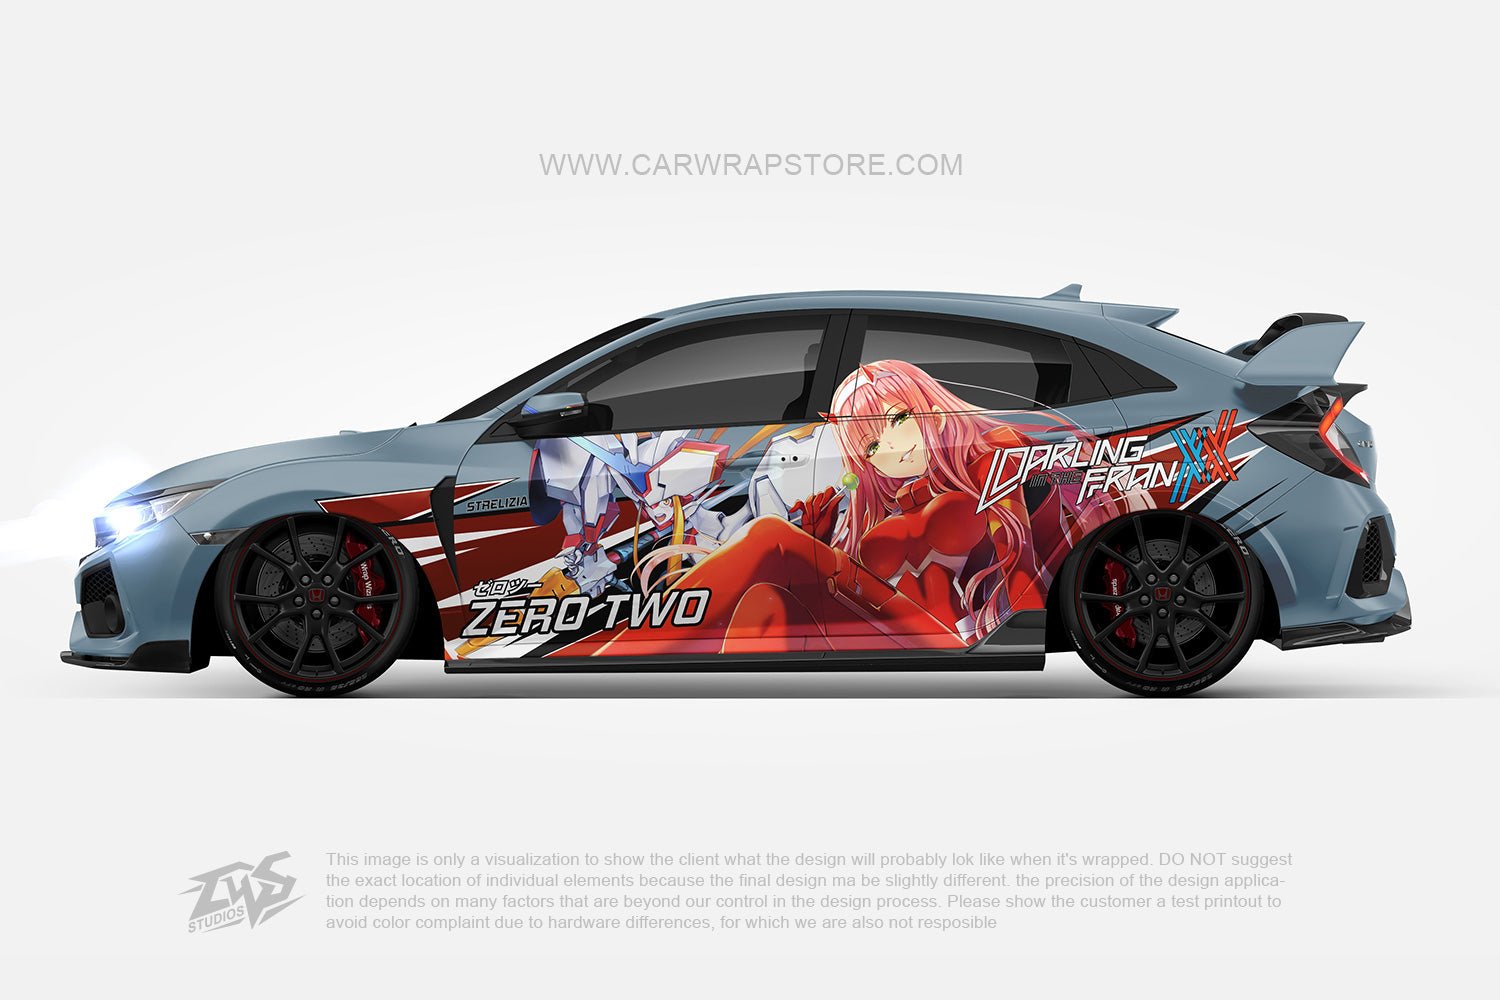 Zero Two DARLING in the FRANXX【002-09】 - Car Wrap Store